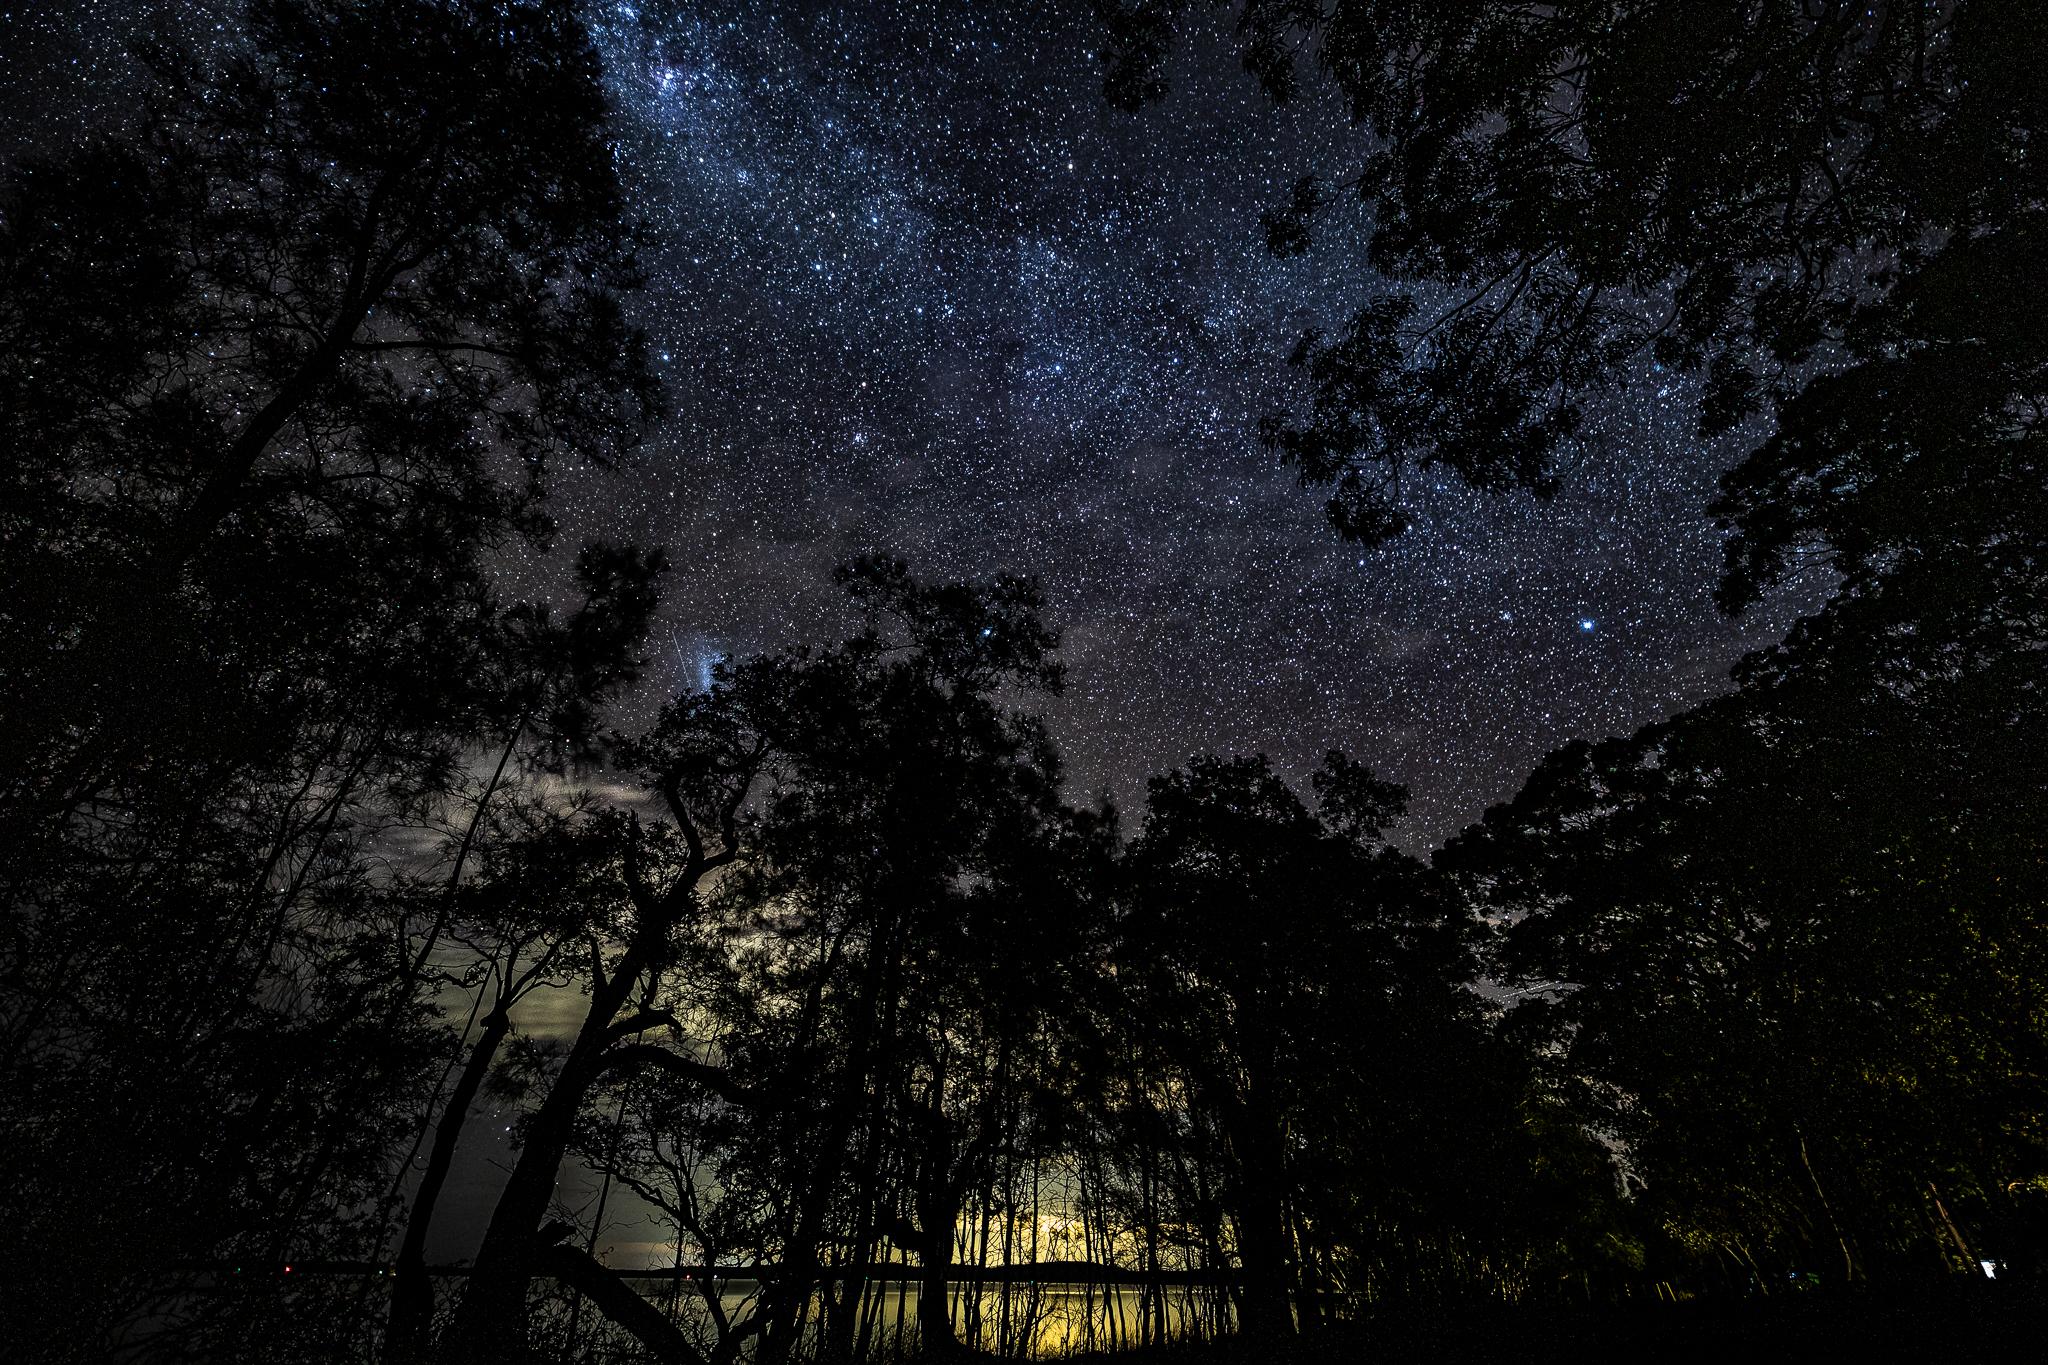 Figure 3 - Milky Way framed by trees with distant town glow on the lake as ground reference.